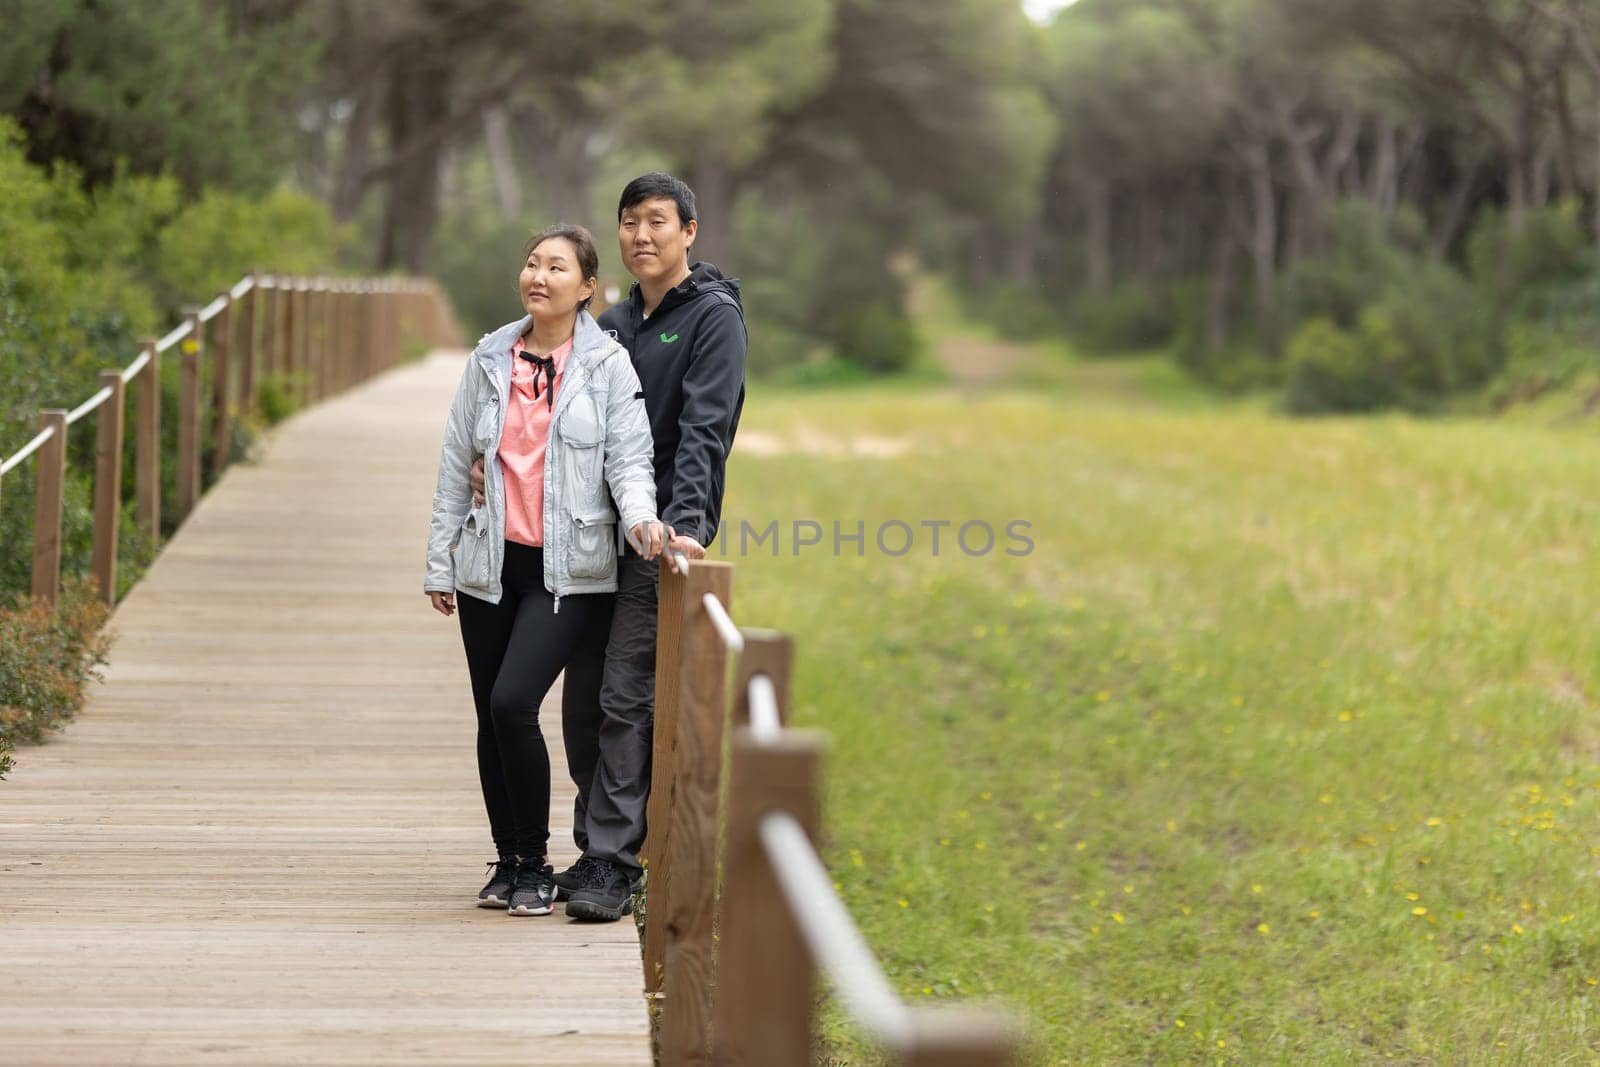 A couple standing on a wooden bridge, one of them wearing a black jacket. Scene is romantic and peaceful